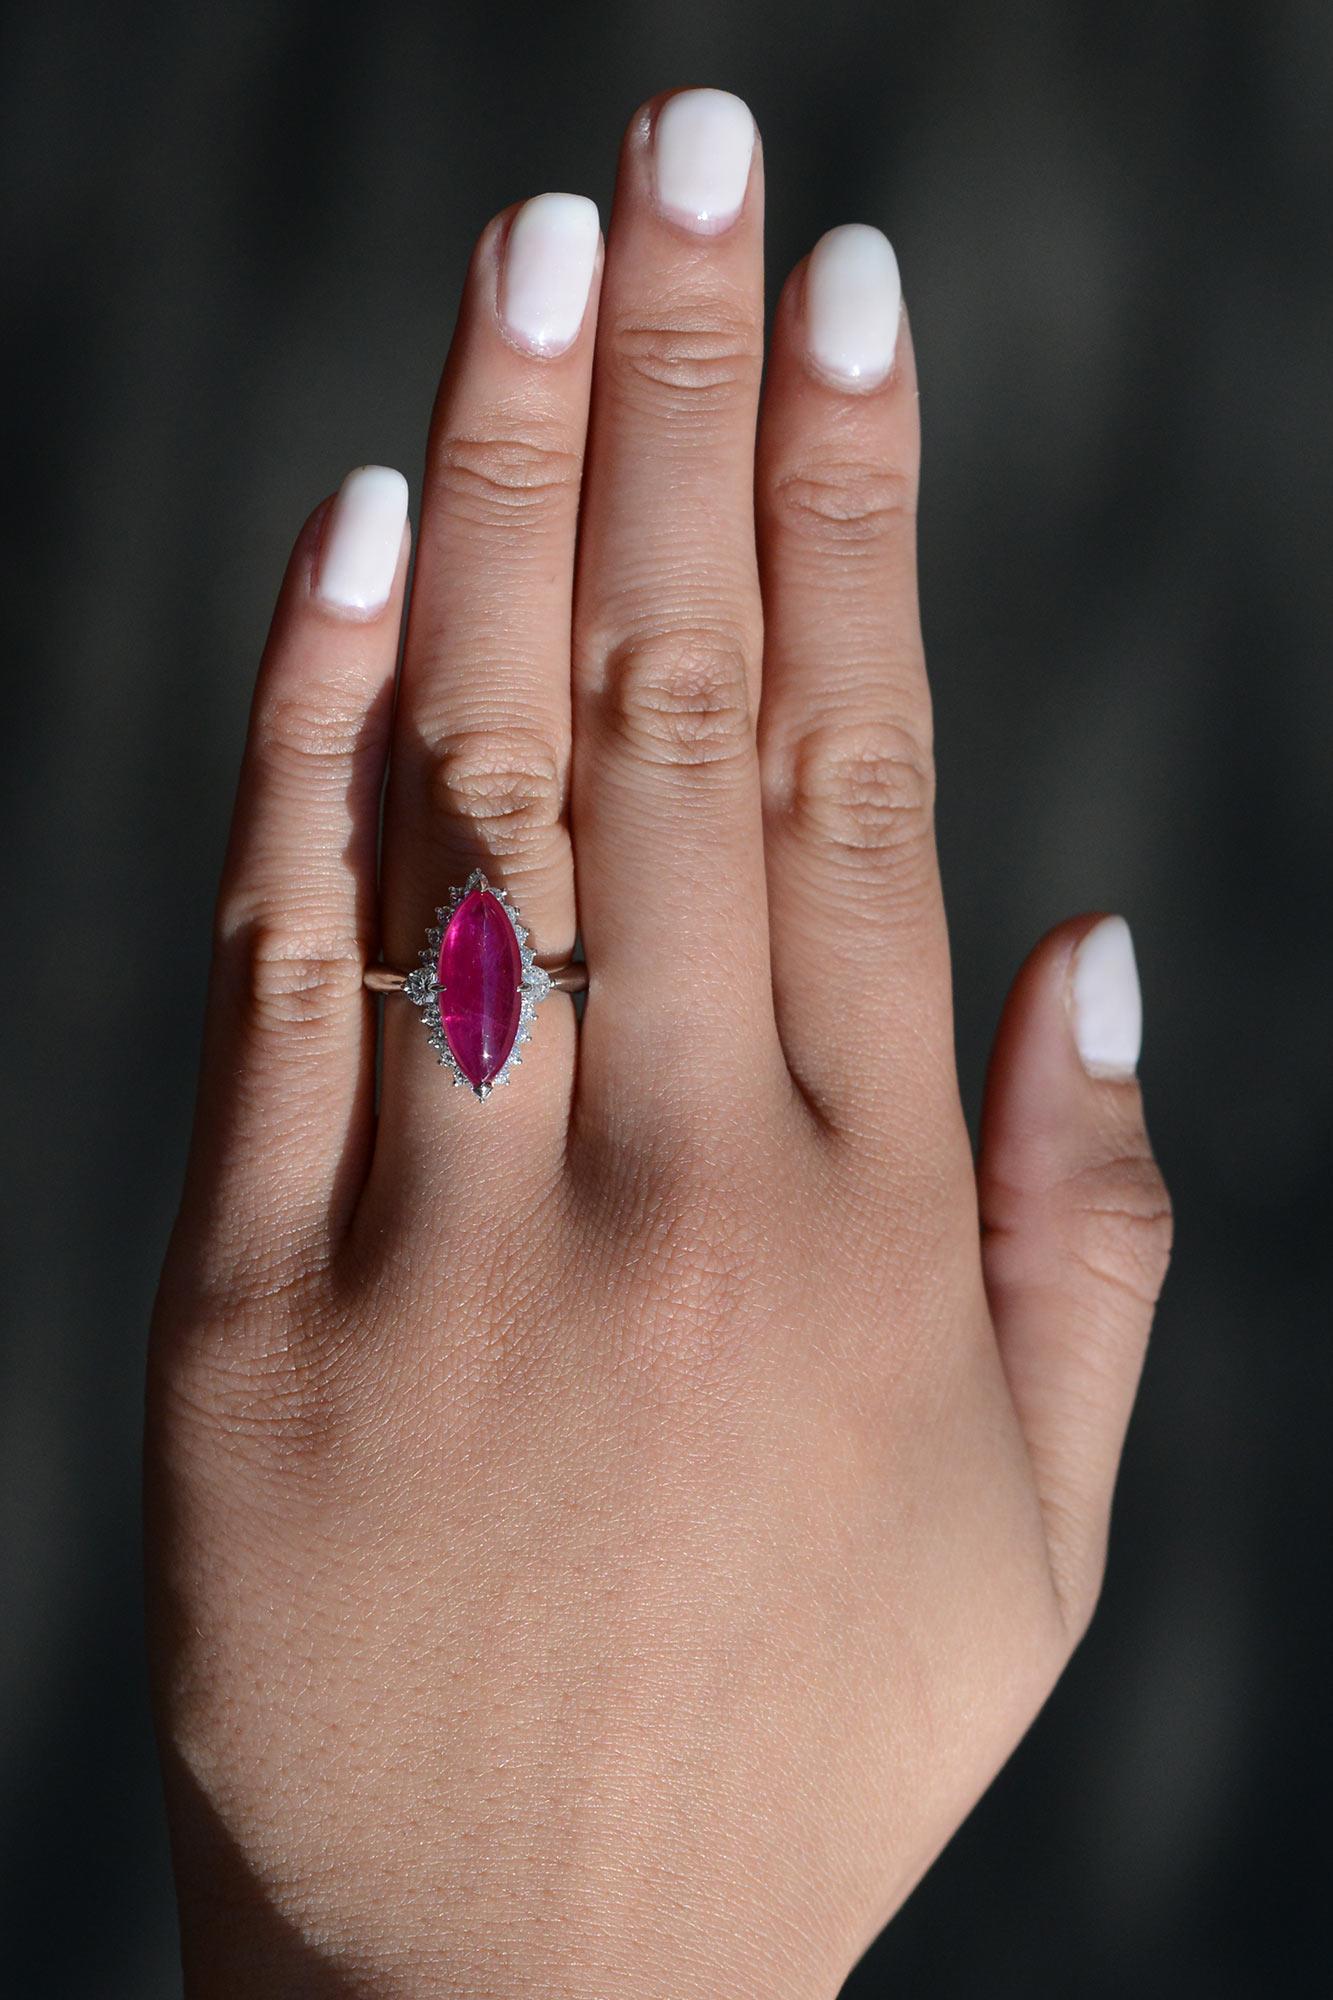 This bold cocktail ring highlights a remarkable elongated ruby cabochon. The glowing marquise shape ruby emits a passionate, luminous red and is surrounded with a halo of 20 round diamonds that give an alluring twinkle. Paired with a platinum band